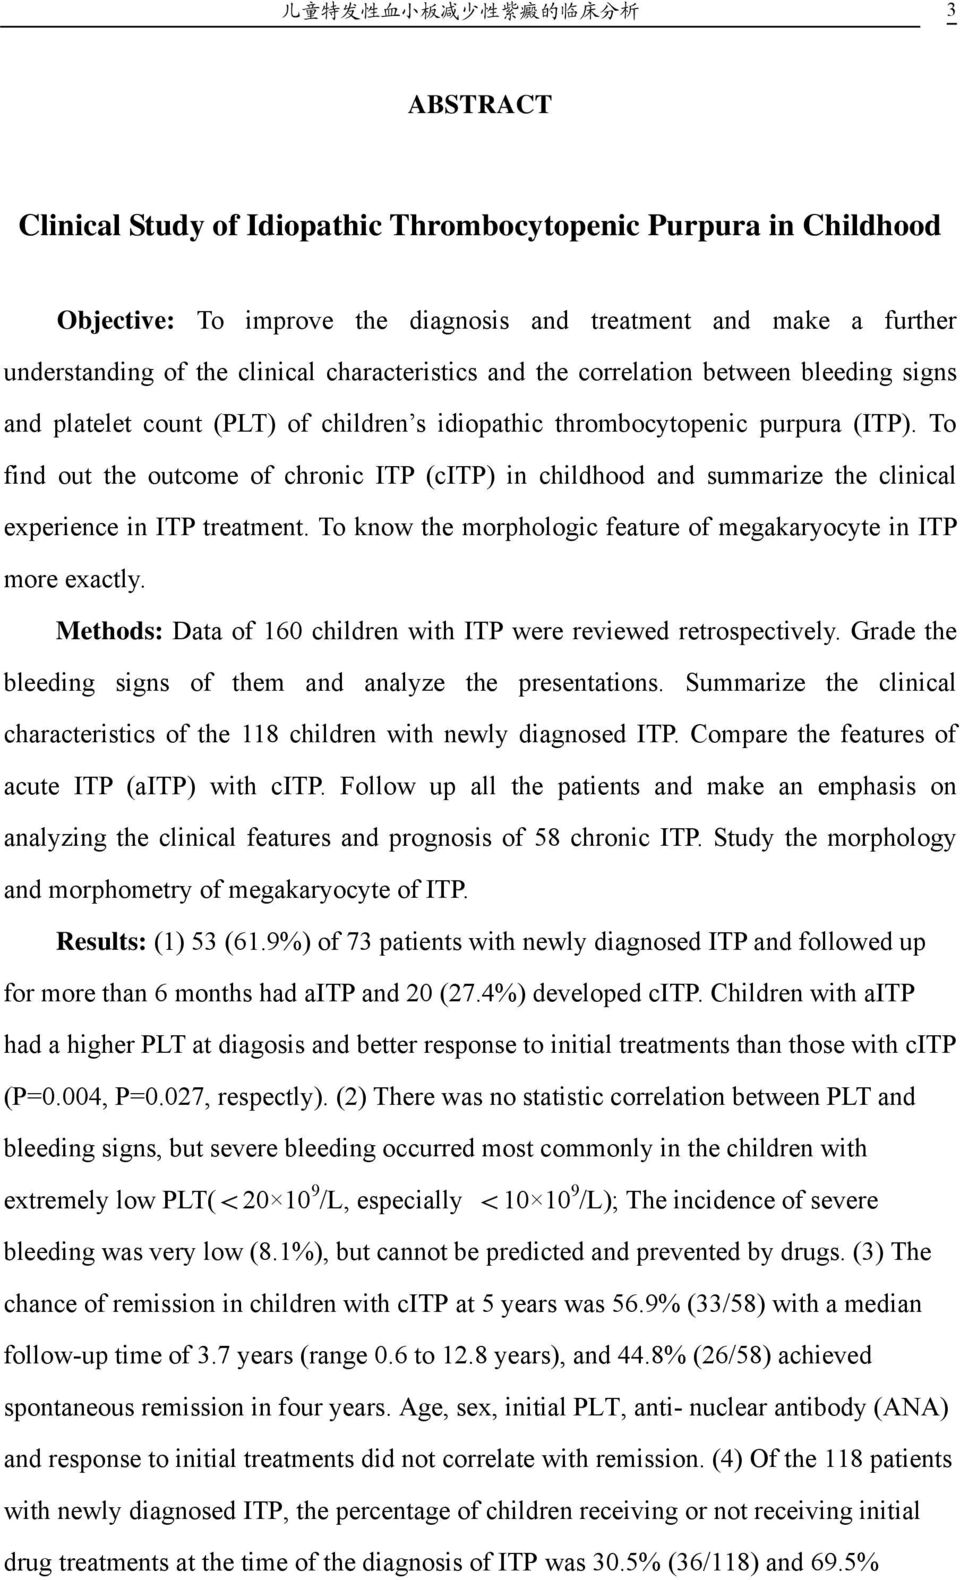 To find out the outcome of chronic ITP (citp) in childhood and summarize the clinical experience in ITP treatment. To know the morphologic feature of megakaryocyte in ITP more exactly.